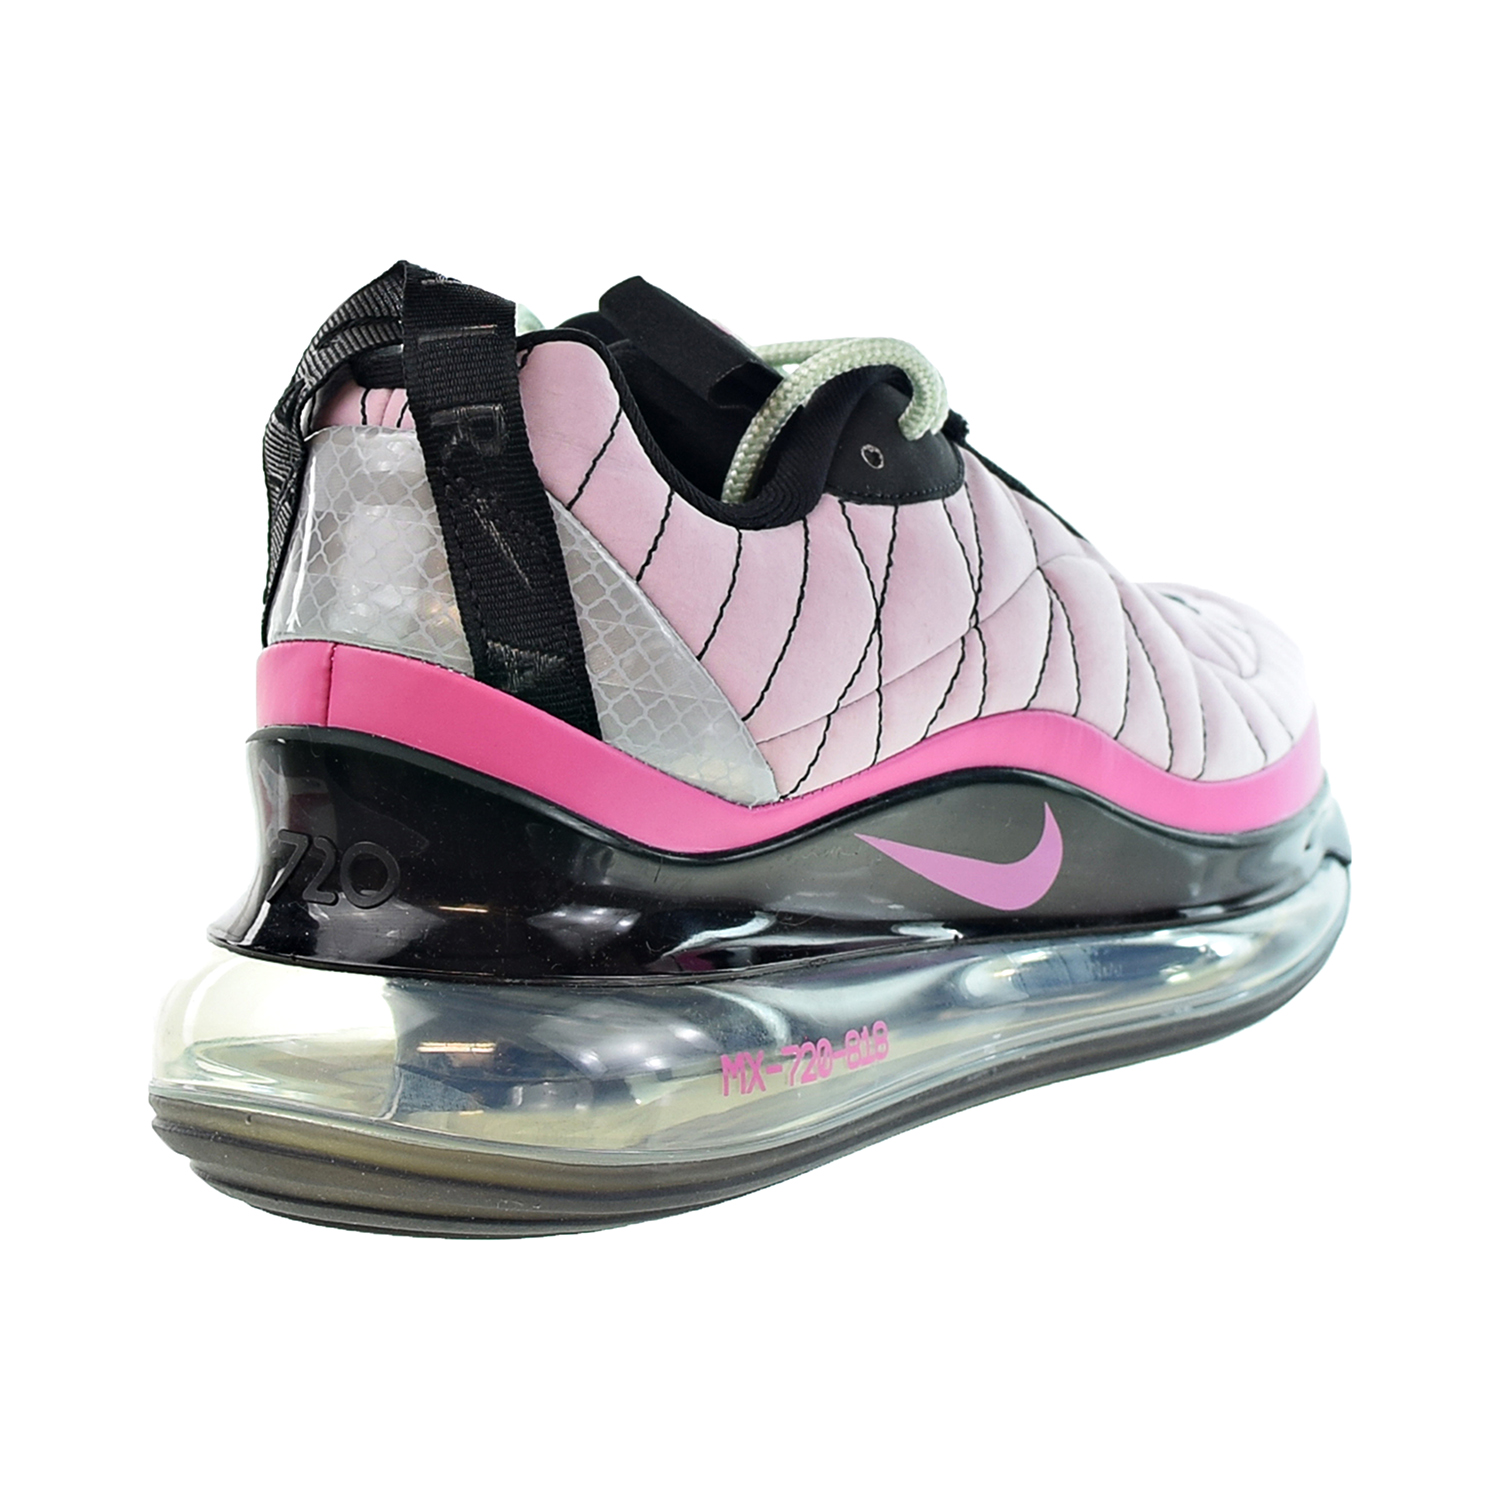 Nike Air Max 720-818 Women's Shoes Iced Lilac-Cosmic Fuchsia ci3869-500 - image 3 of 6